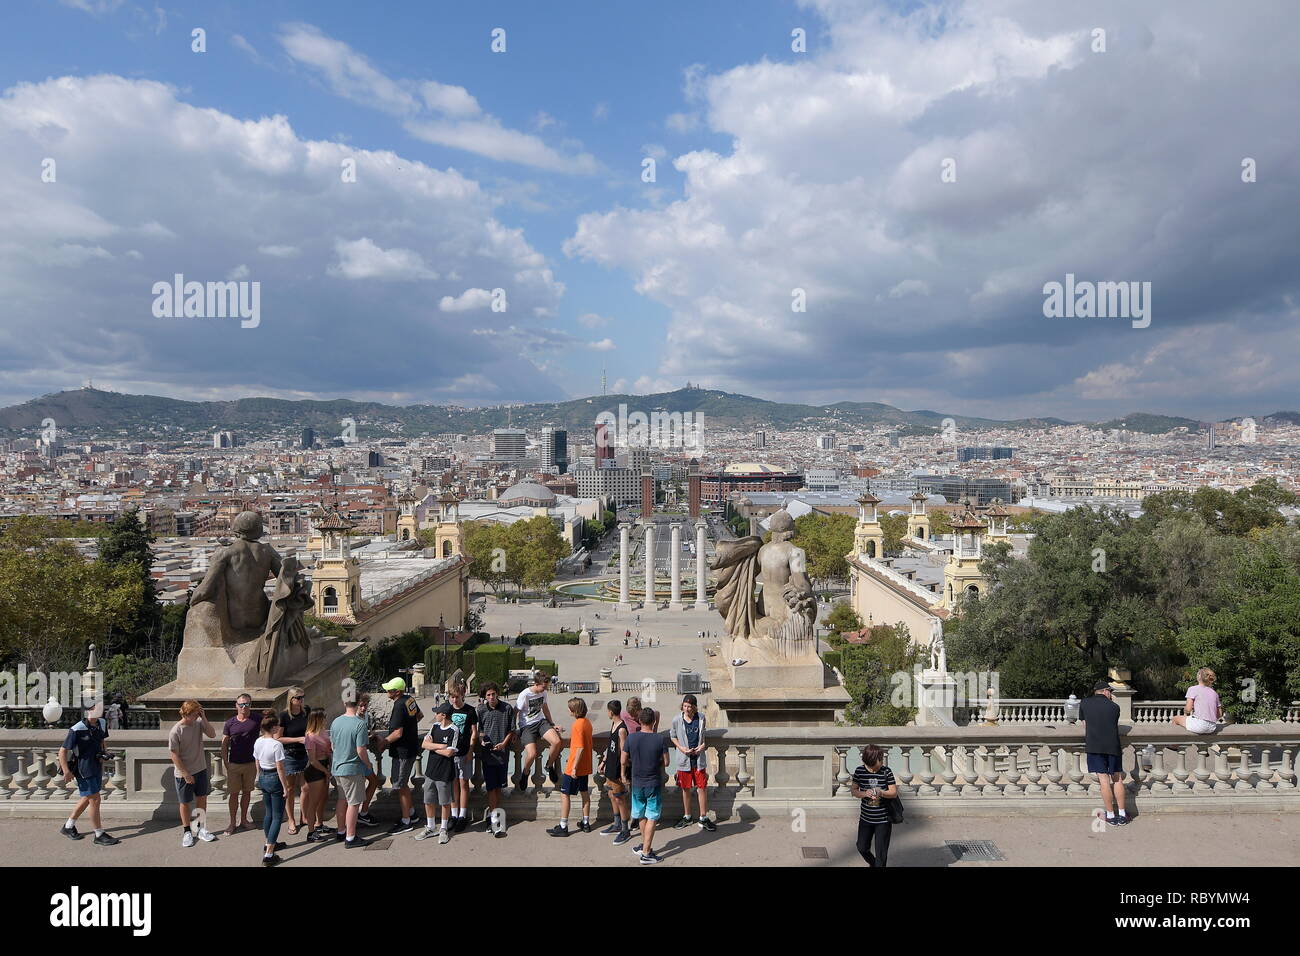 Barcelona, Spain. On the steps of the  National Museum of Art , you can see the Plaza de Espana and the hills of Tibidabo. Stock Photo